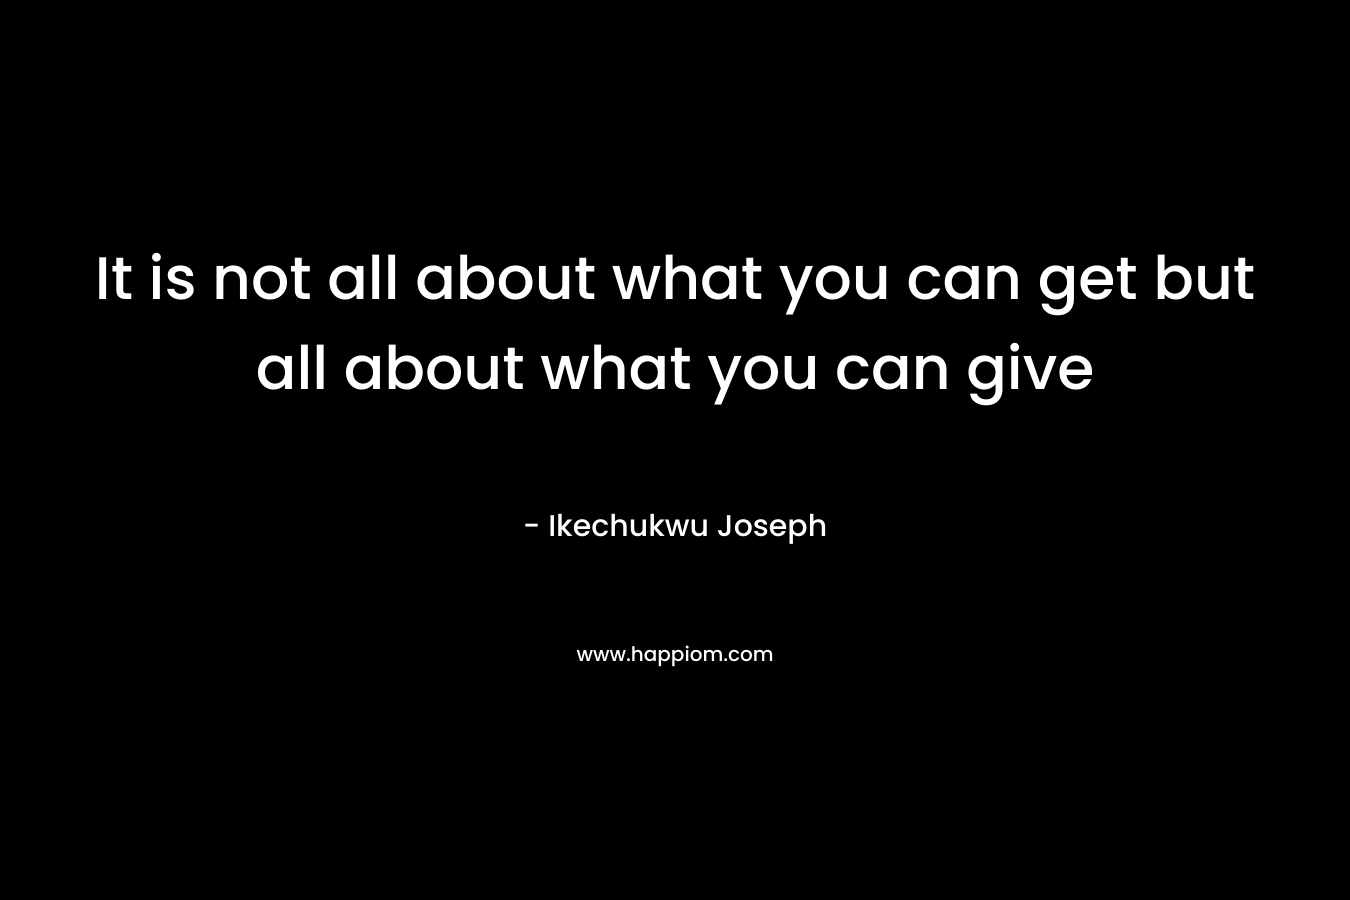 It is not all about what you can get but all about what you can give